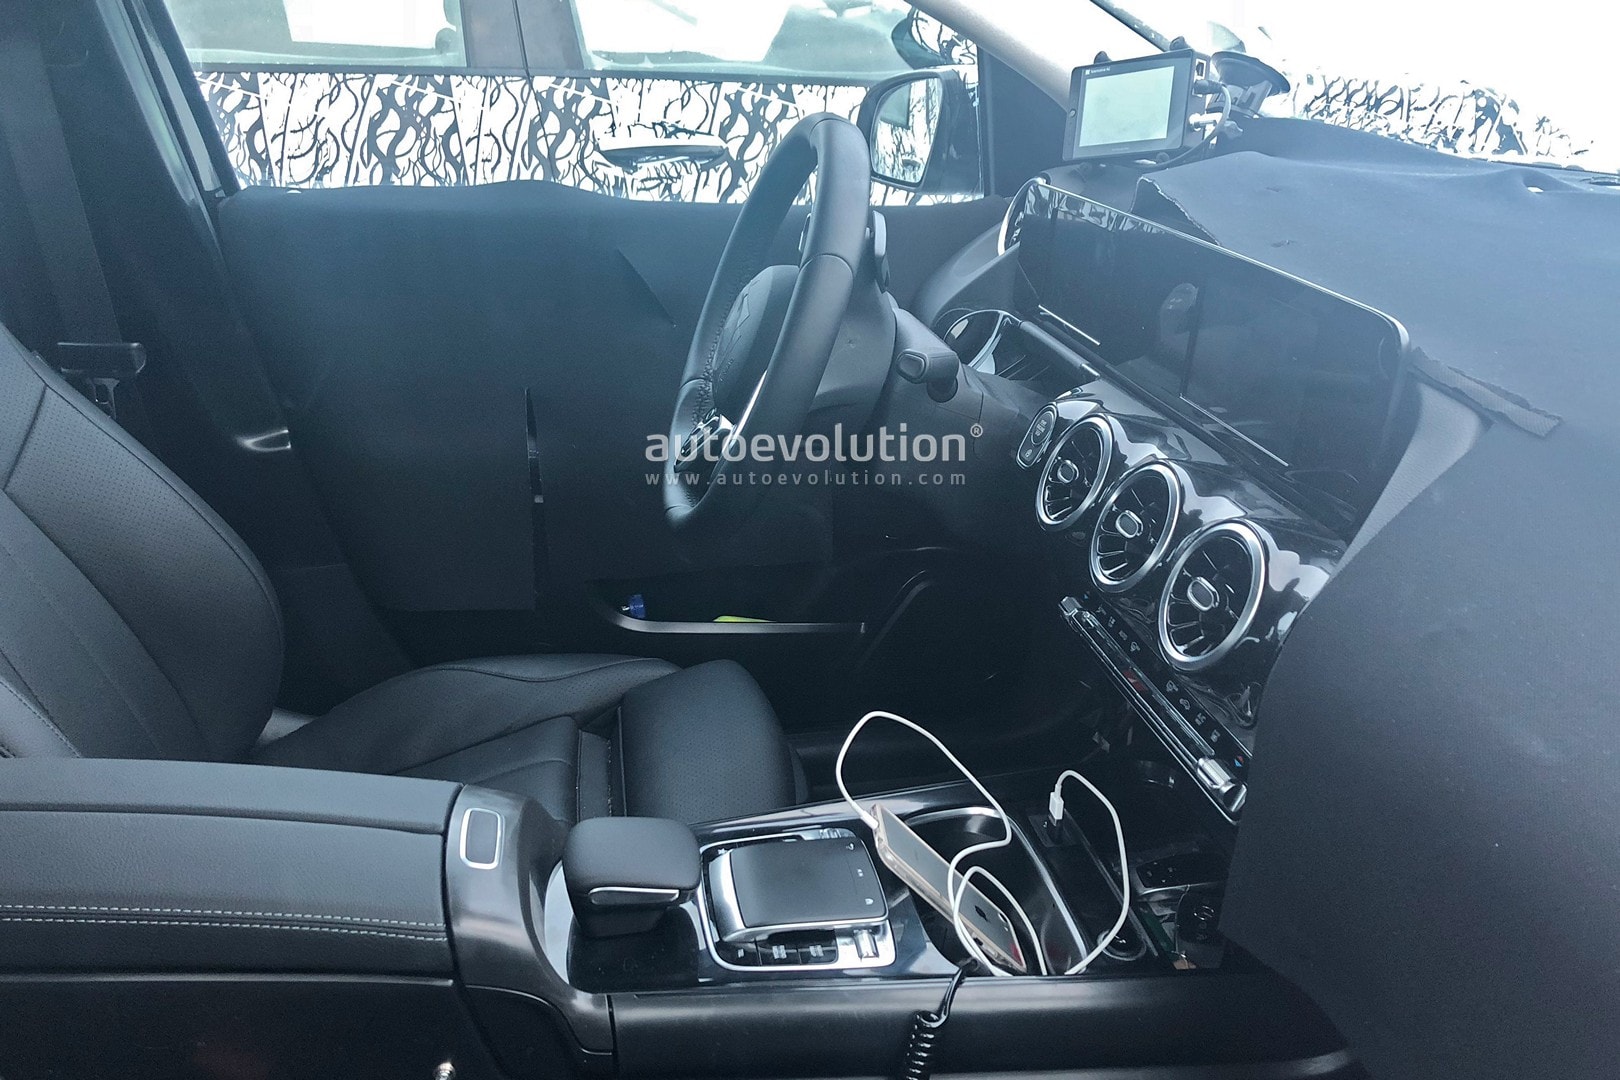 2019 Mercedes Benz B Class Reveals New Interior With Mbux